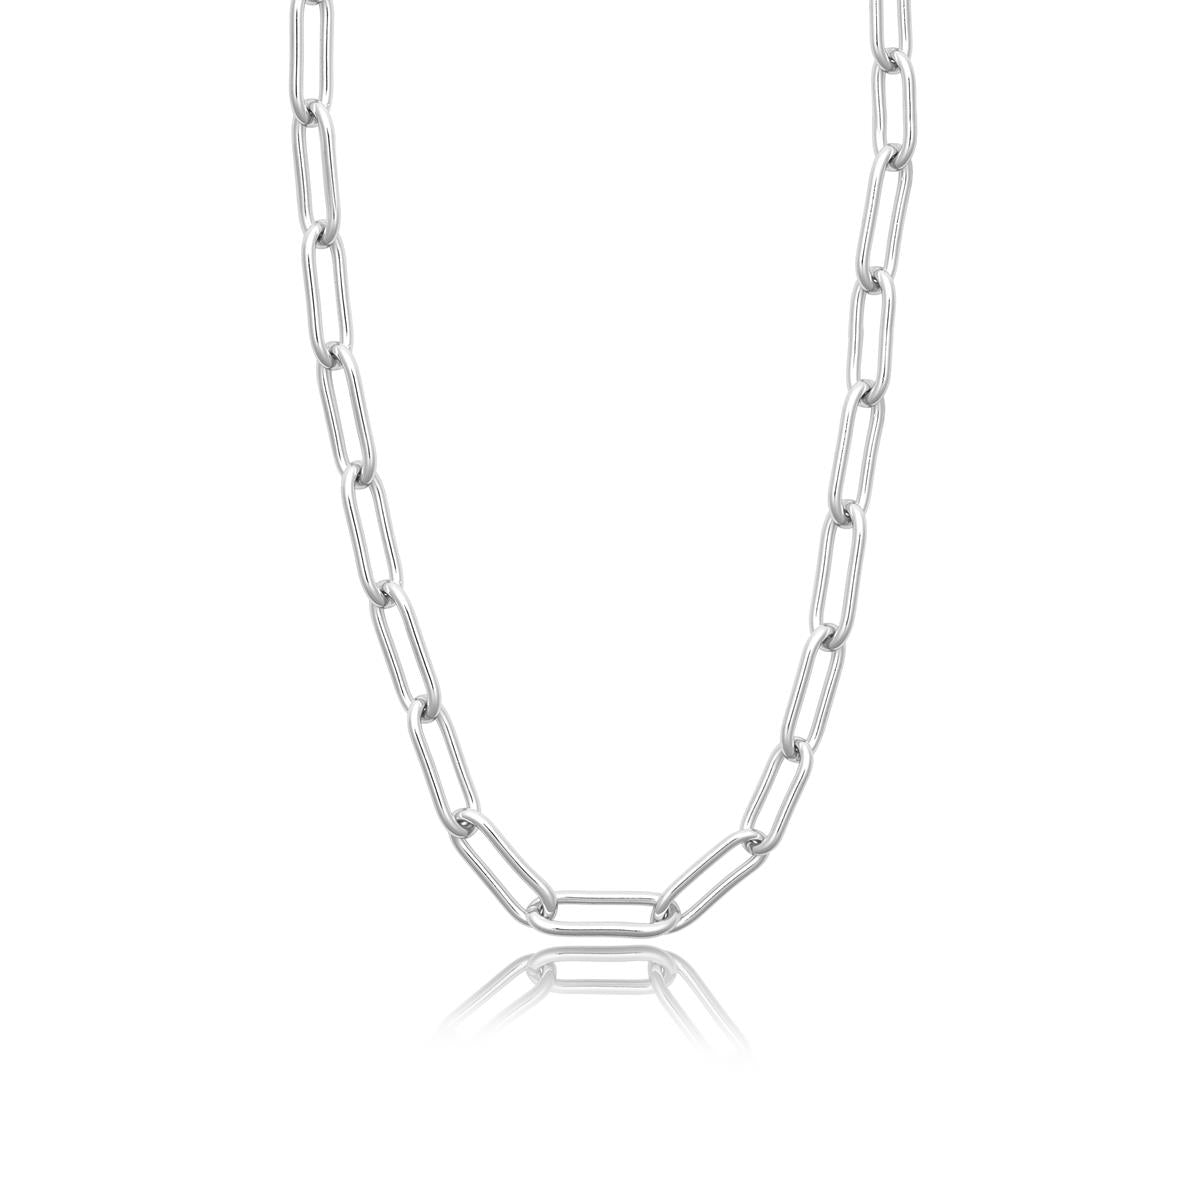 Achara 21 Inch Paperclip Chain Link Necklace - Silver 